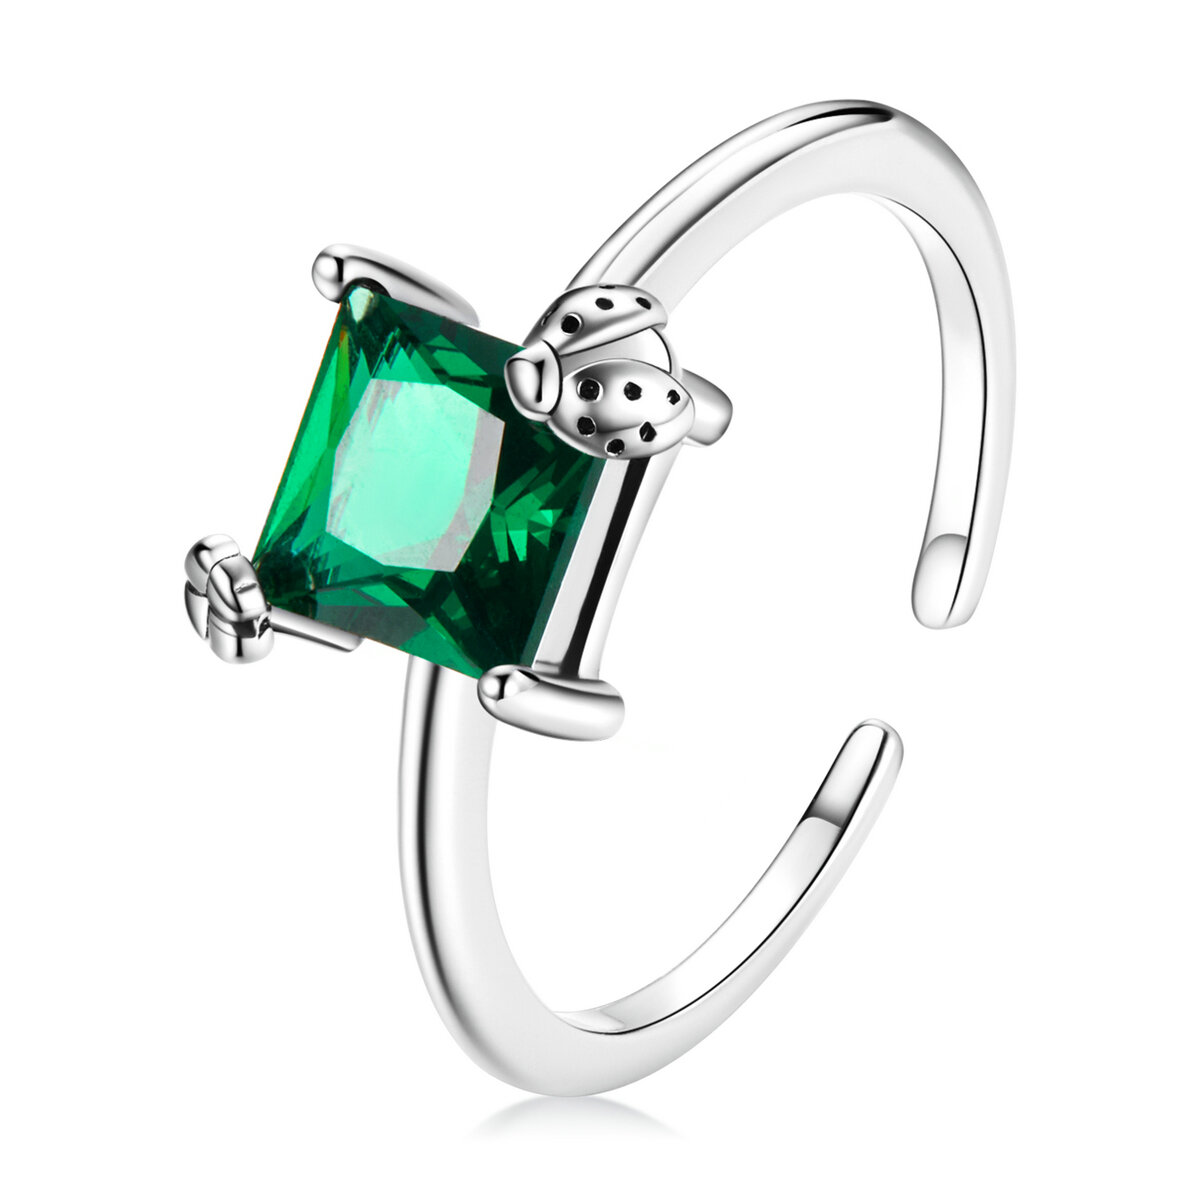 GemKing SCR754 Green square zirconium S925 Sterling Silver Ring